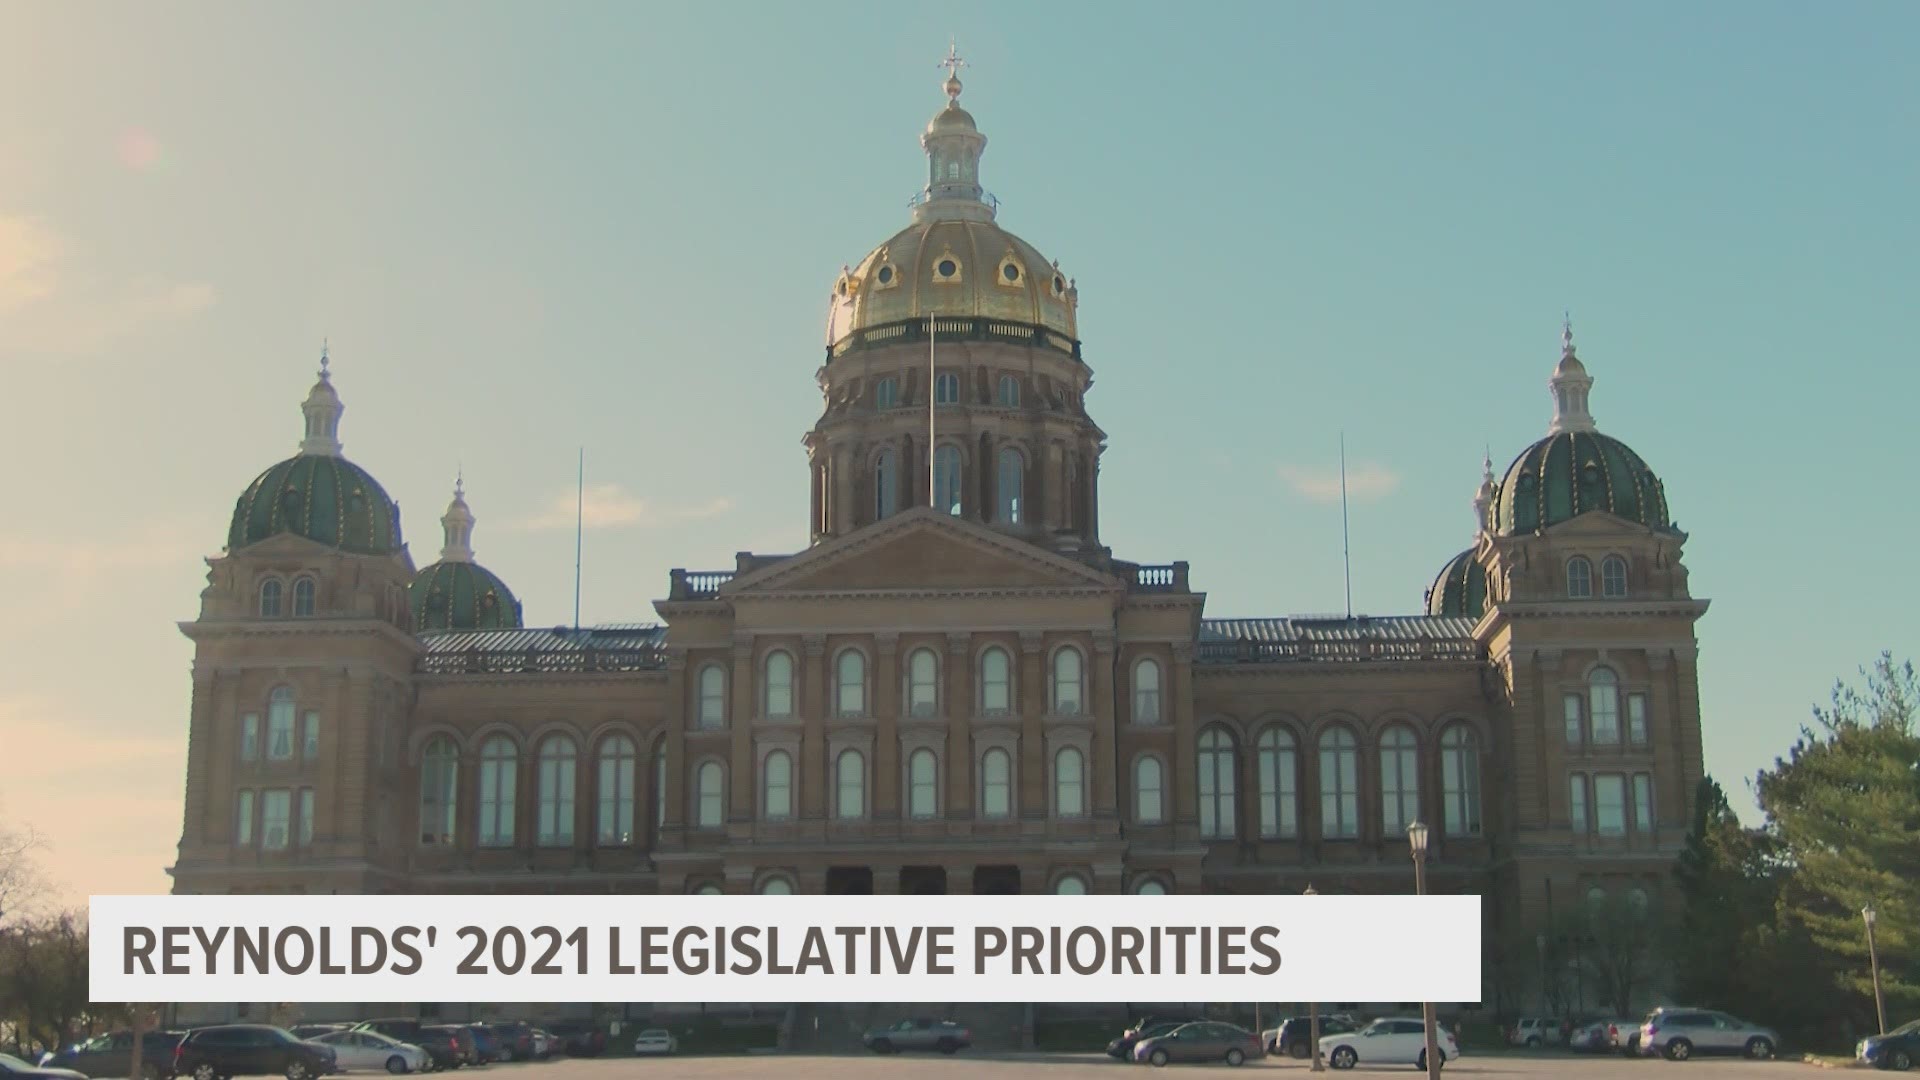 One policy statehouse Republicans hope to take care of right away is the bipartisan issue of child care, which was sidelined due to the COVID-19 pandemic.